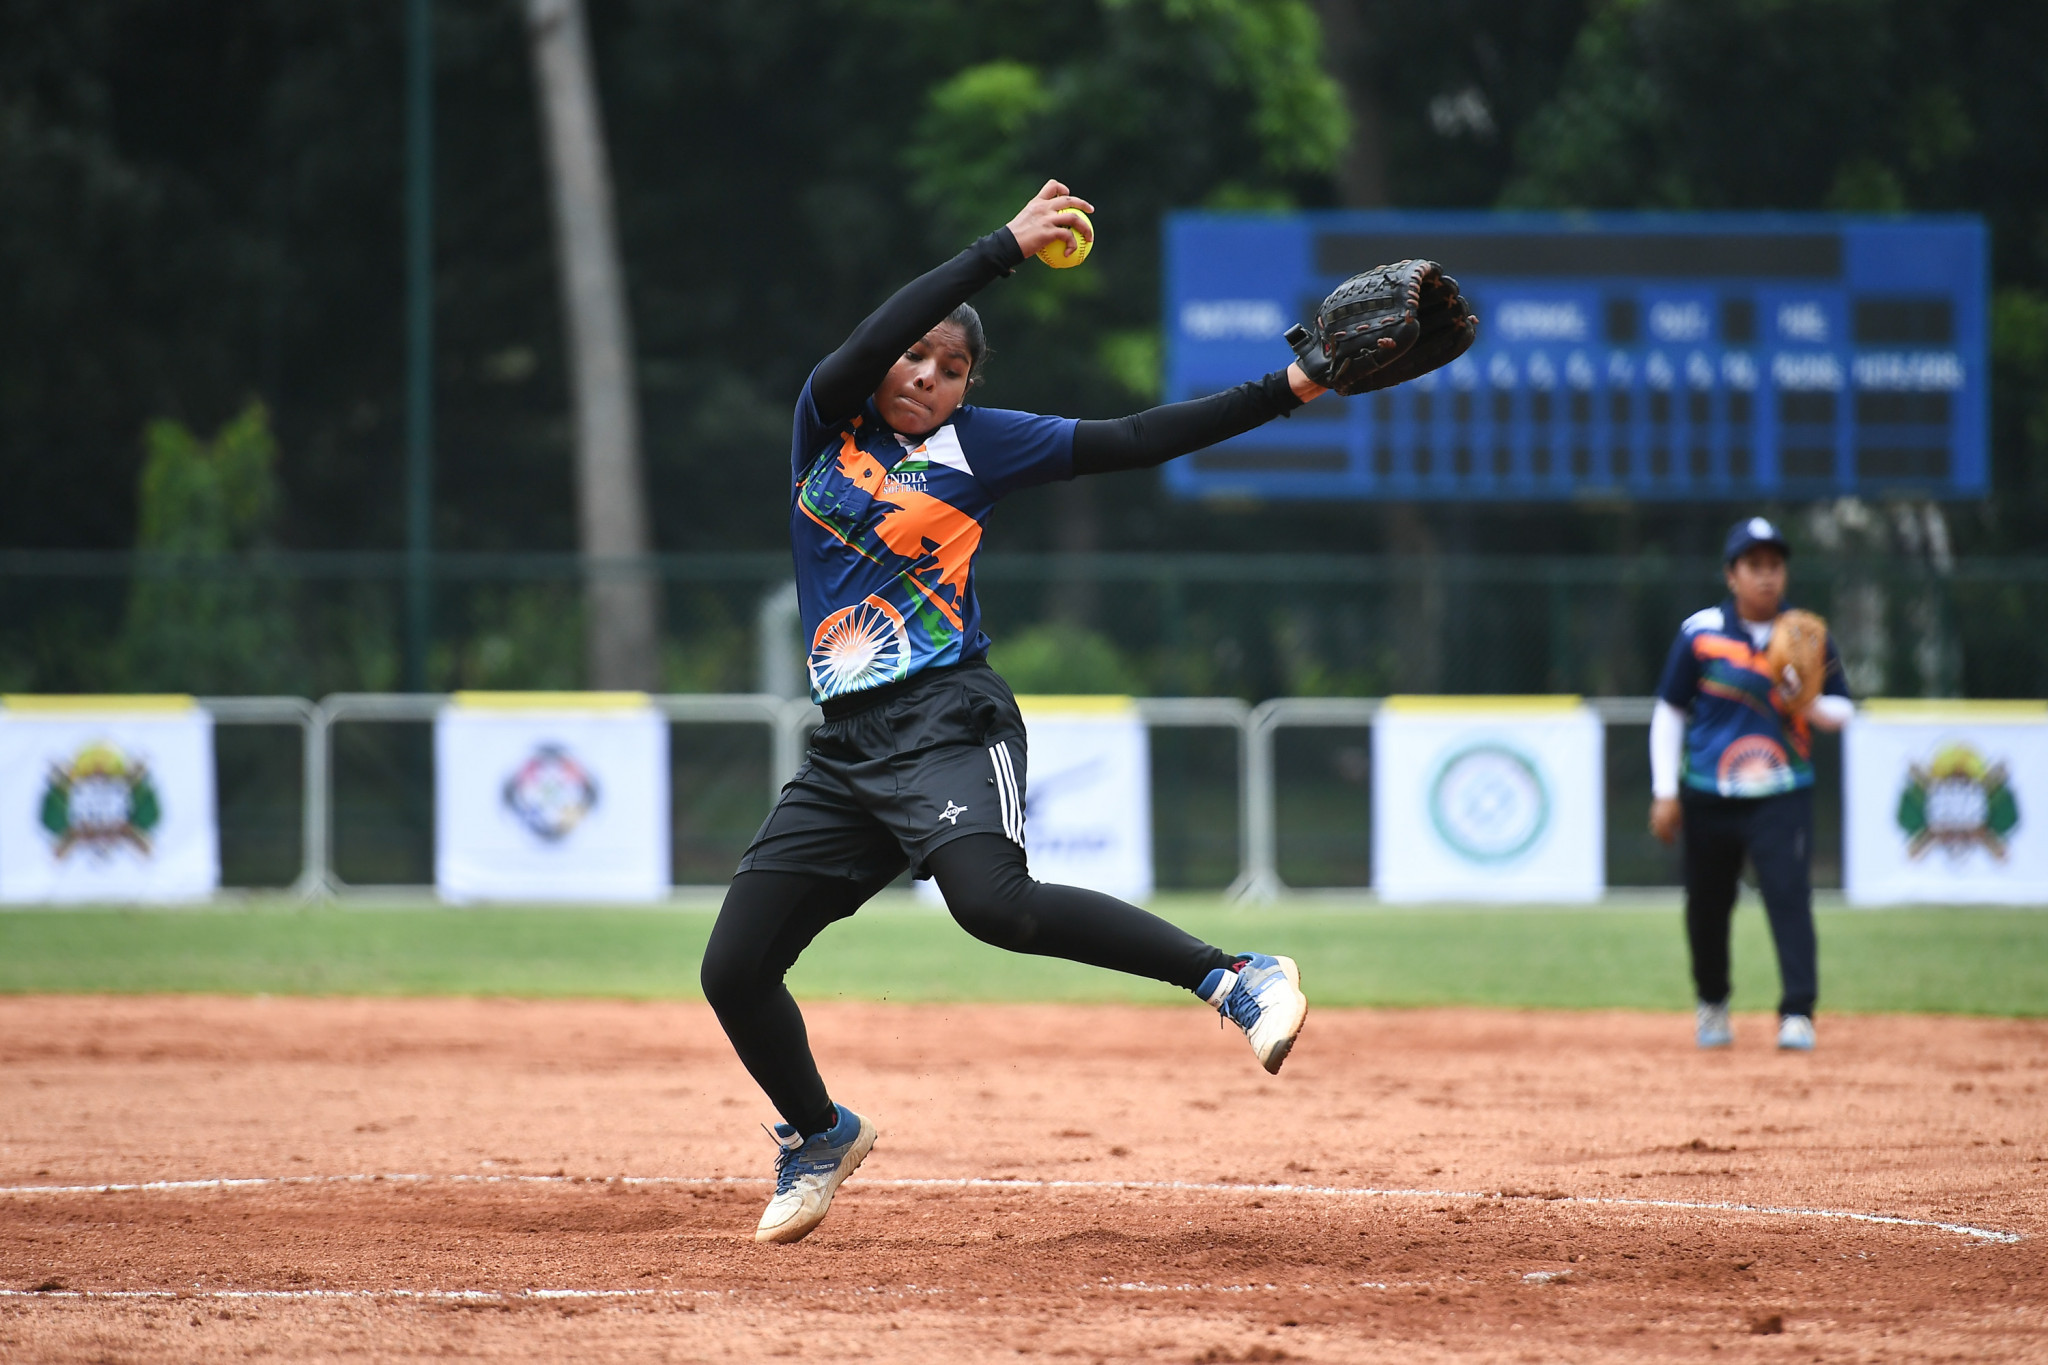 Softball Association of India staging Asian Games trials